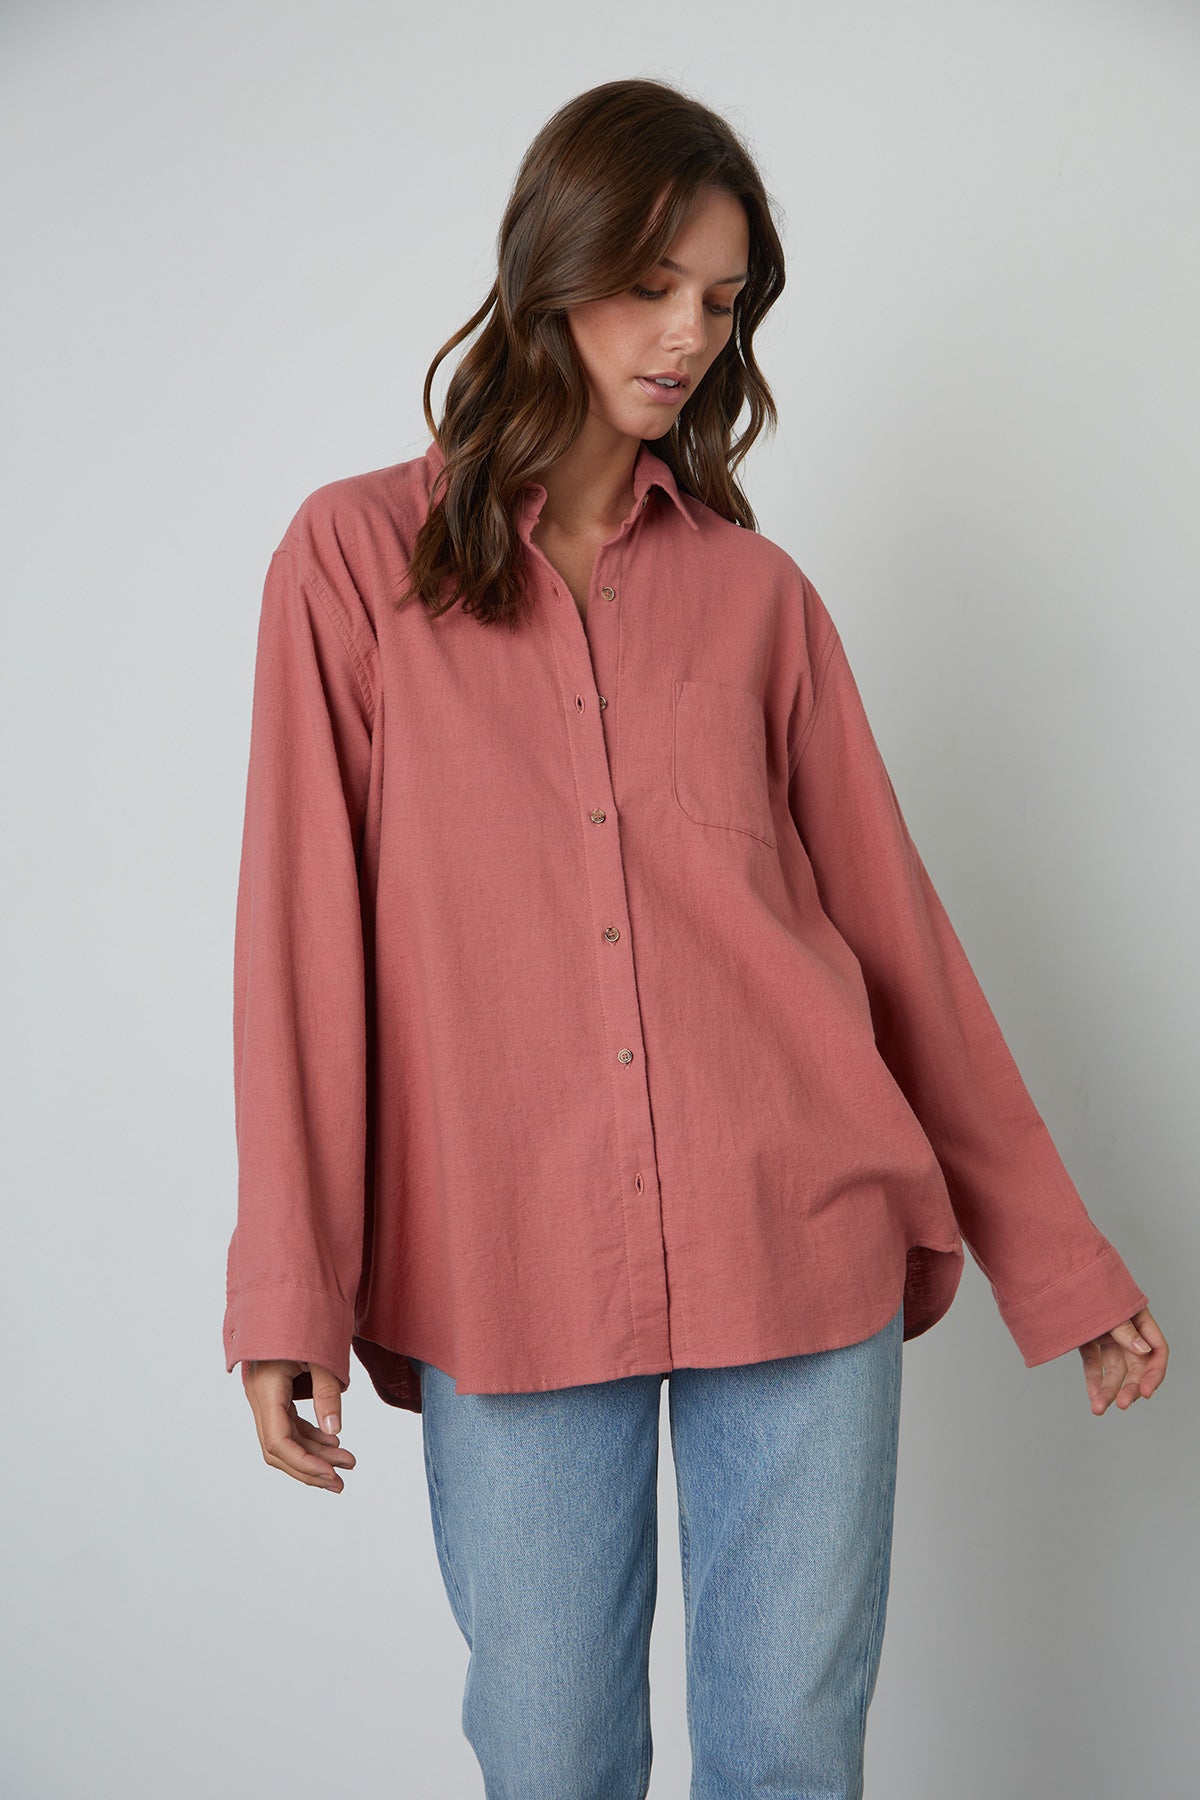 The model is wearing a slightly oversized Chelsey Button-Up Shirt made by Velvet by Graham & Spencer.-25382747701441